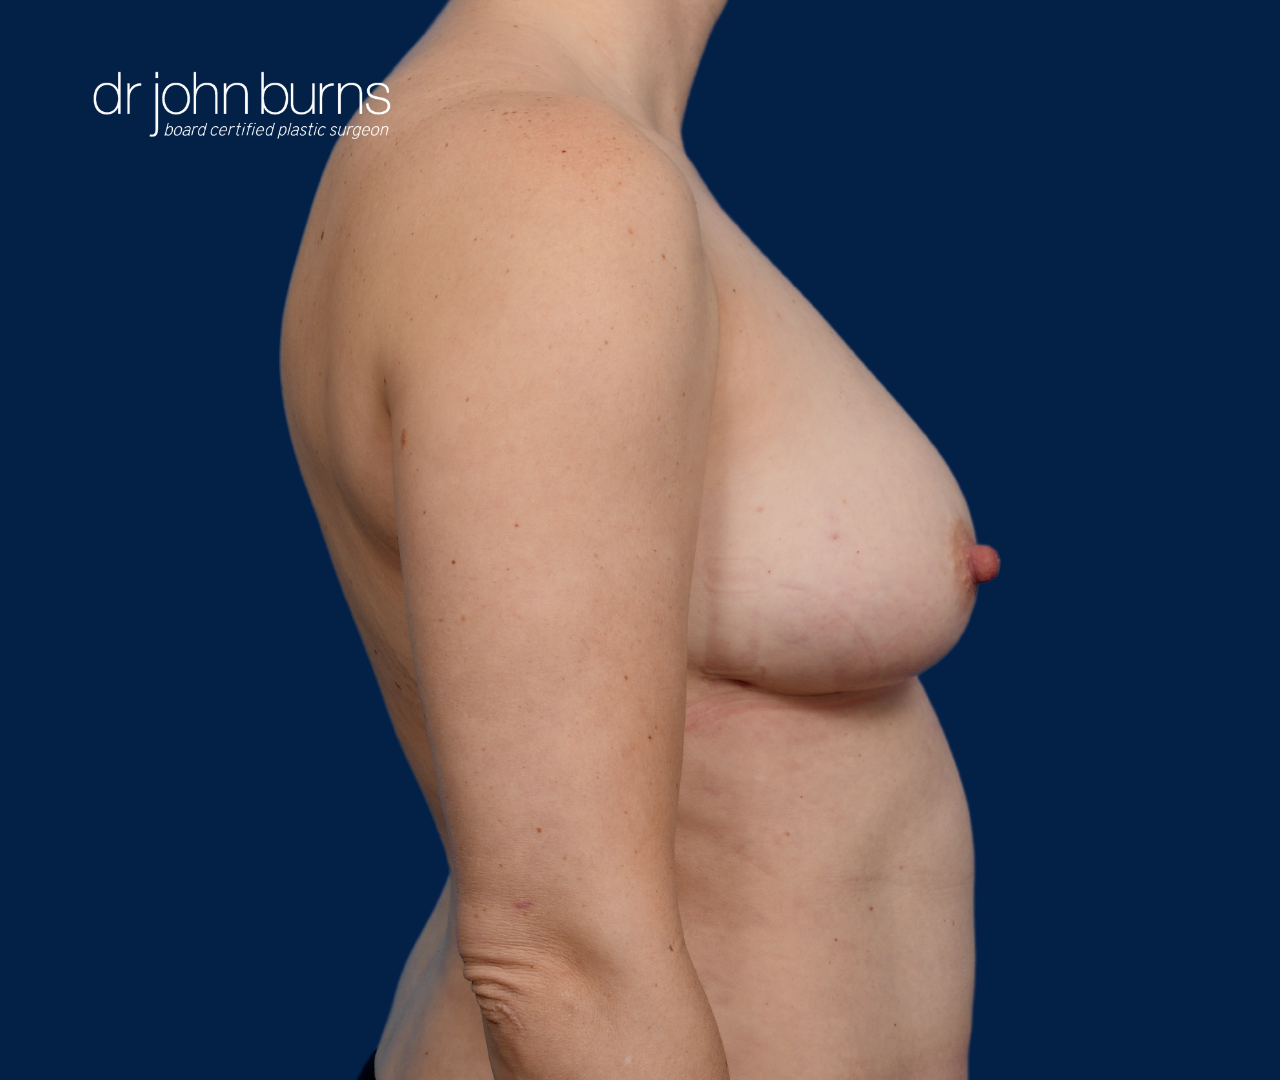 case 15- profile view | after fat transfer to breast by top plastic surgeon, Dr. John Burns